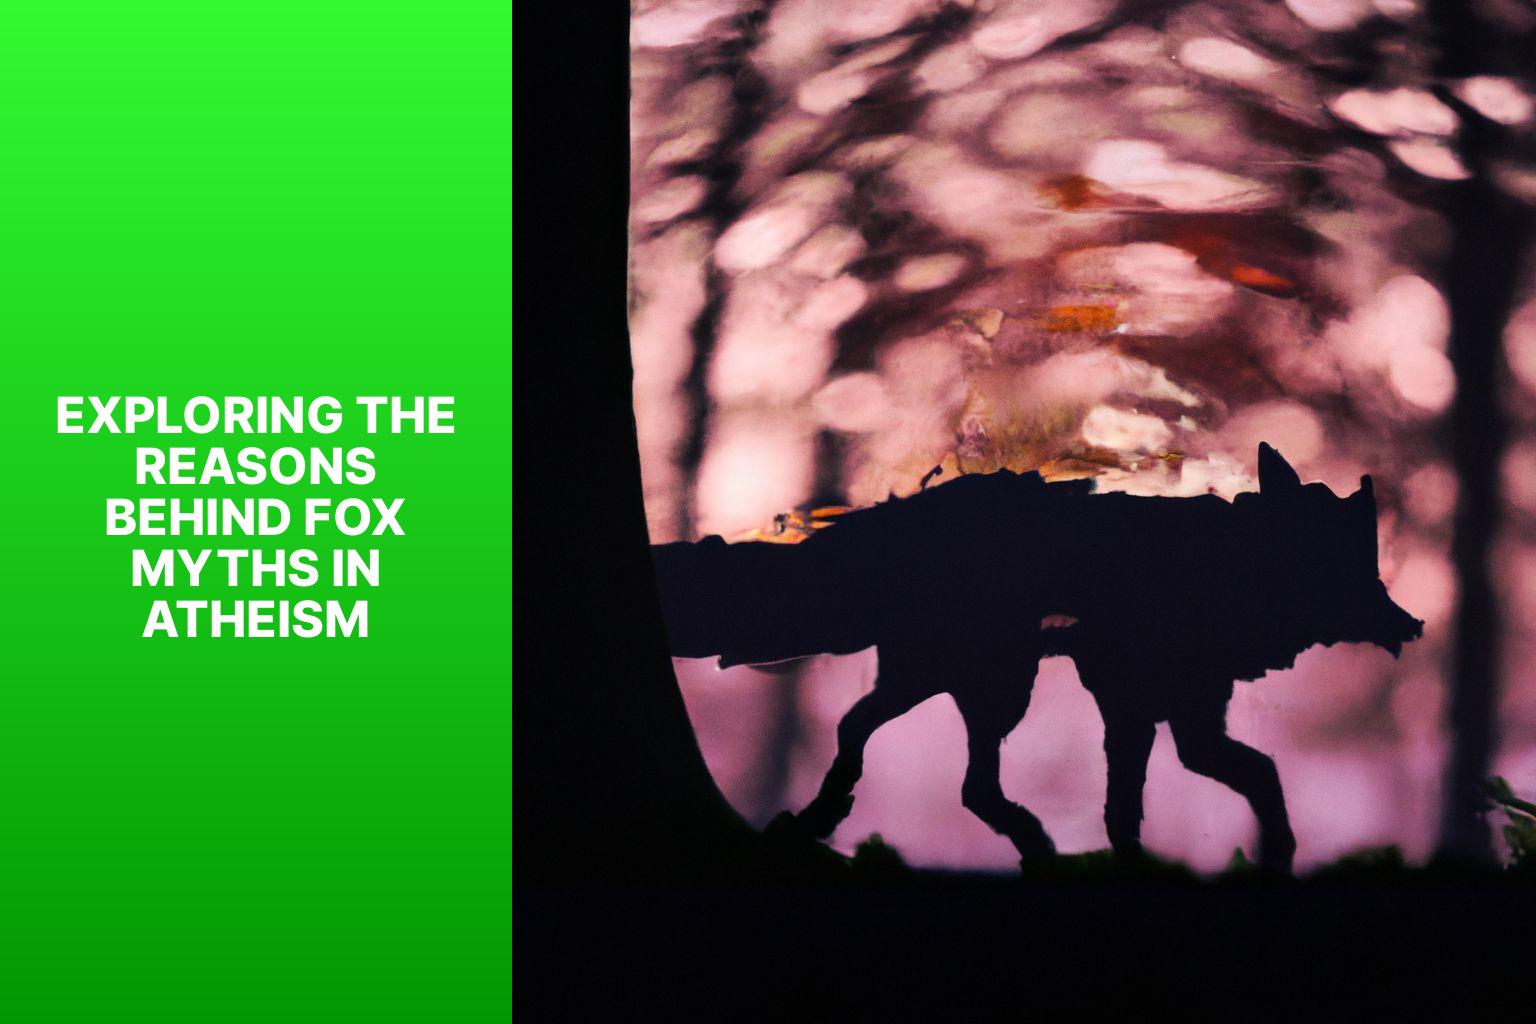 Exploring the reasons behind Fox Myths in Atheism - Fox Myths in Atheism 